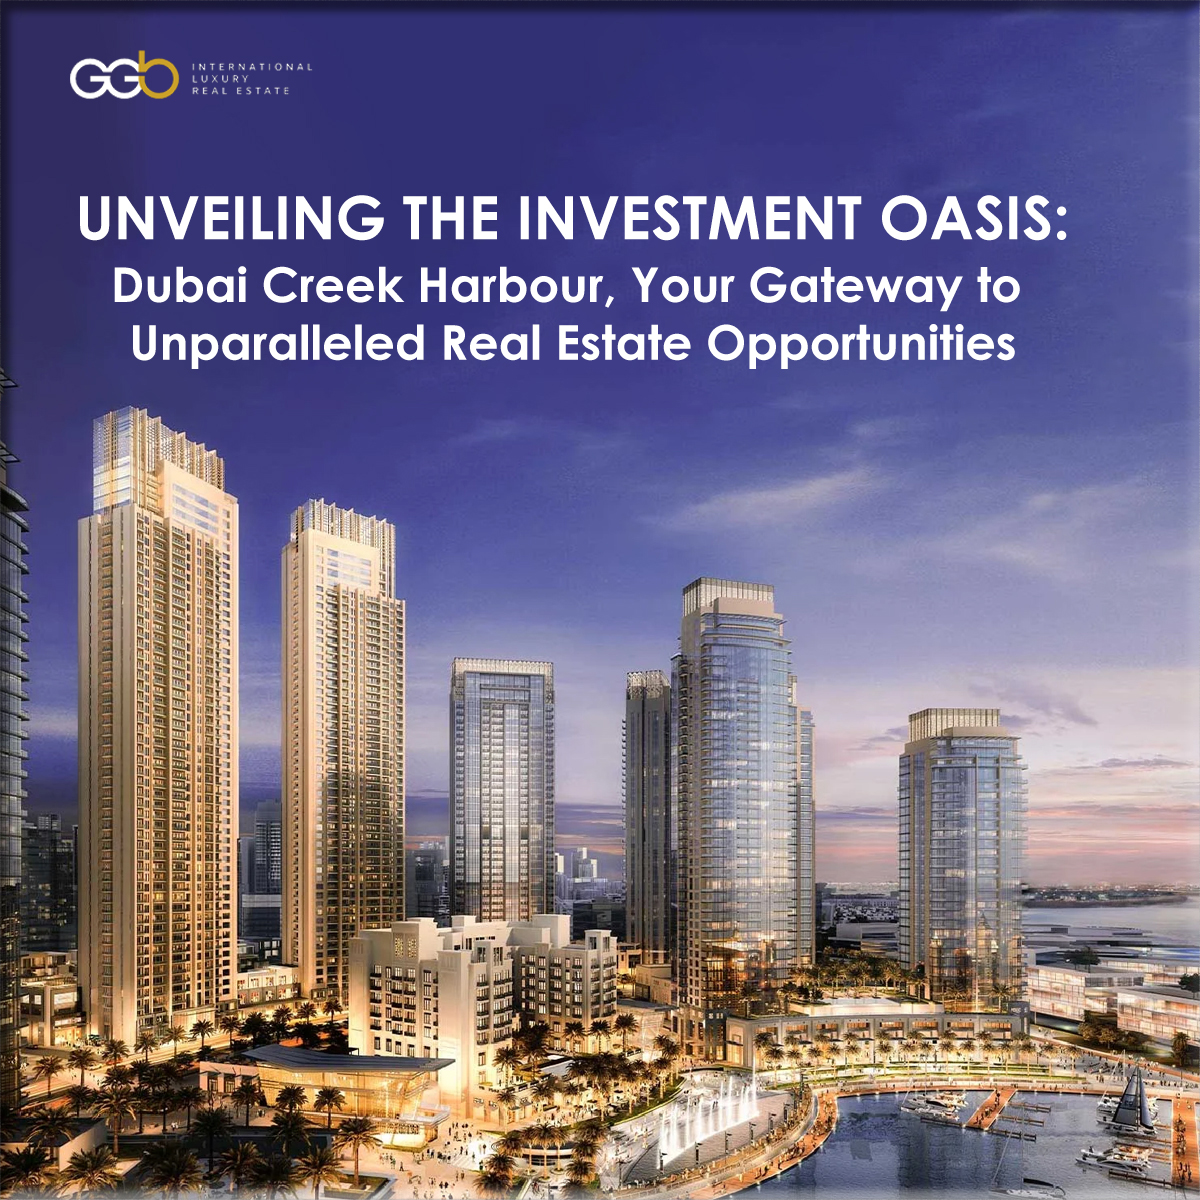 Unveiling the Investment Oasis: Dubai Creek Harbour, Your Gateway to Unparalleled Real Estate Opportunities